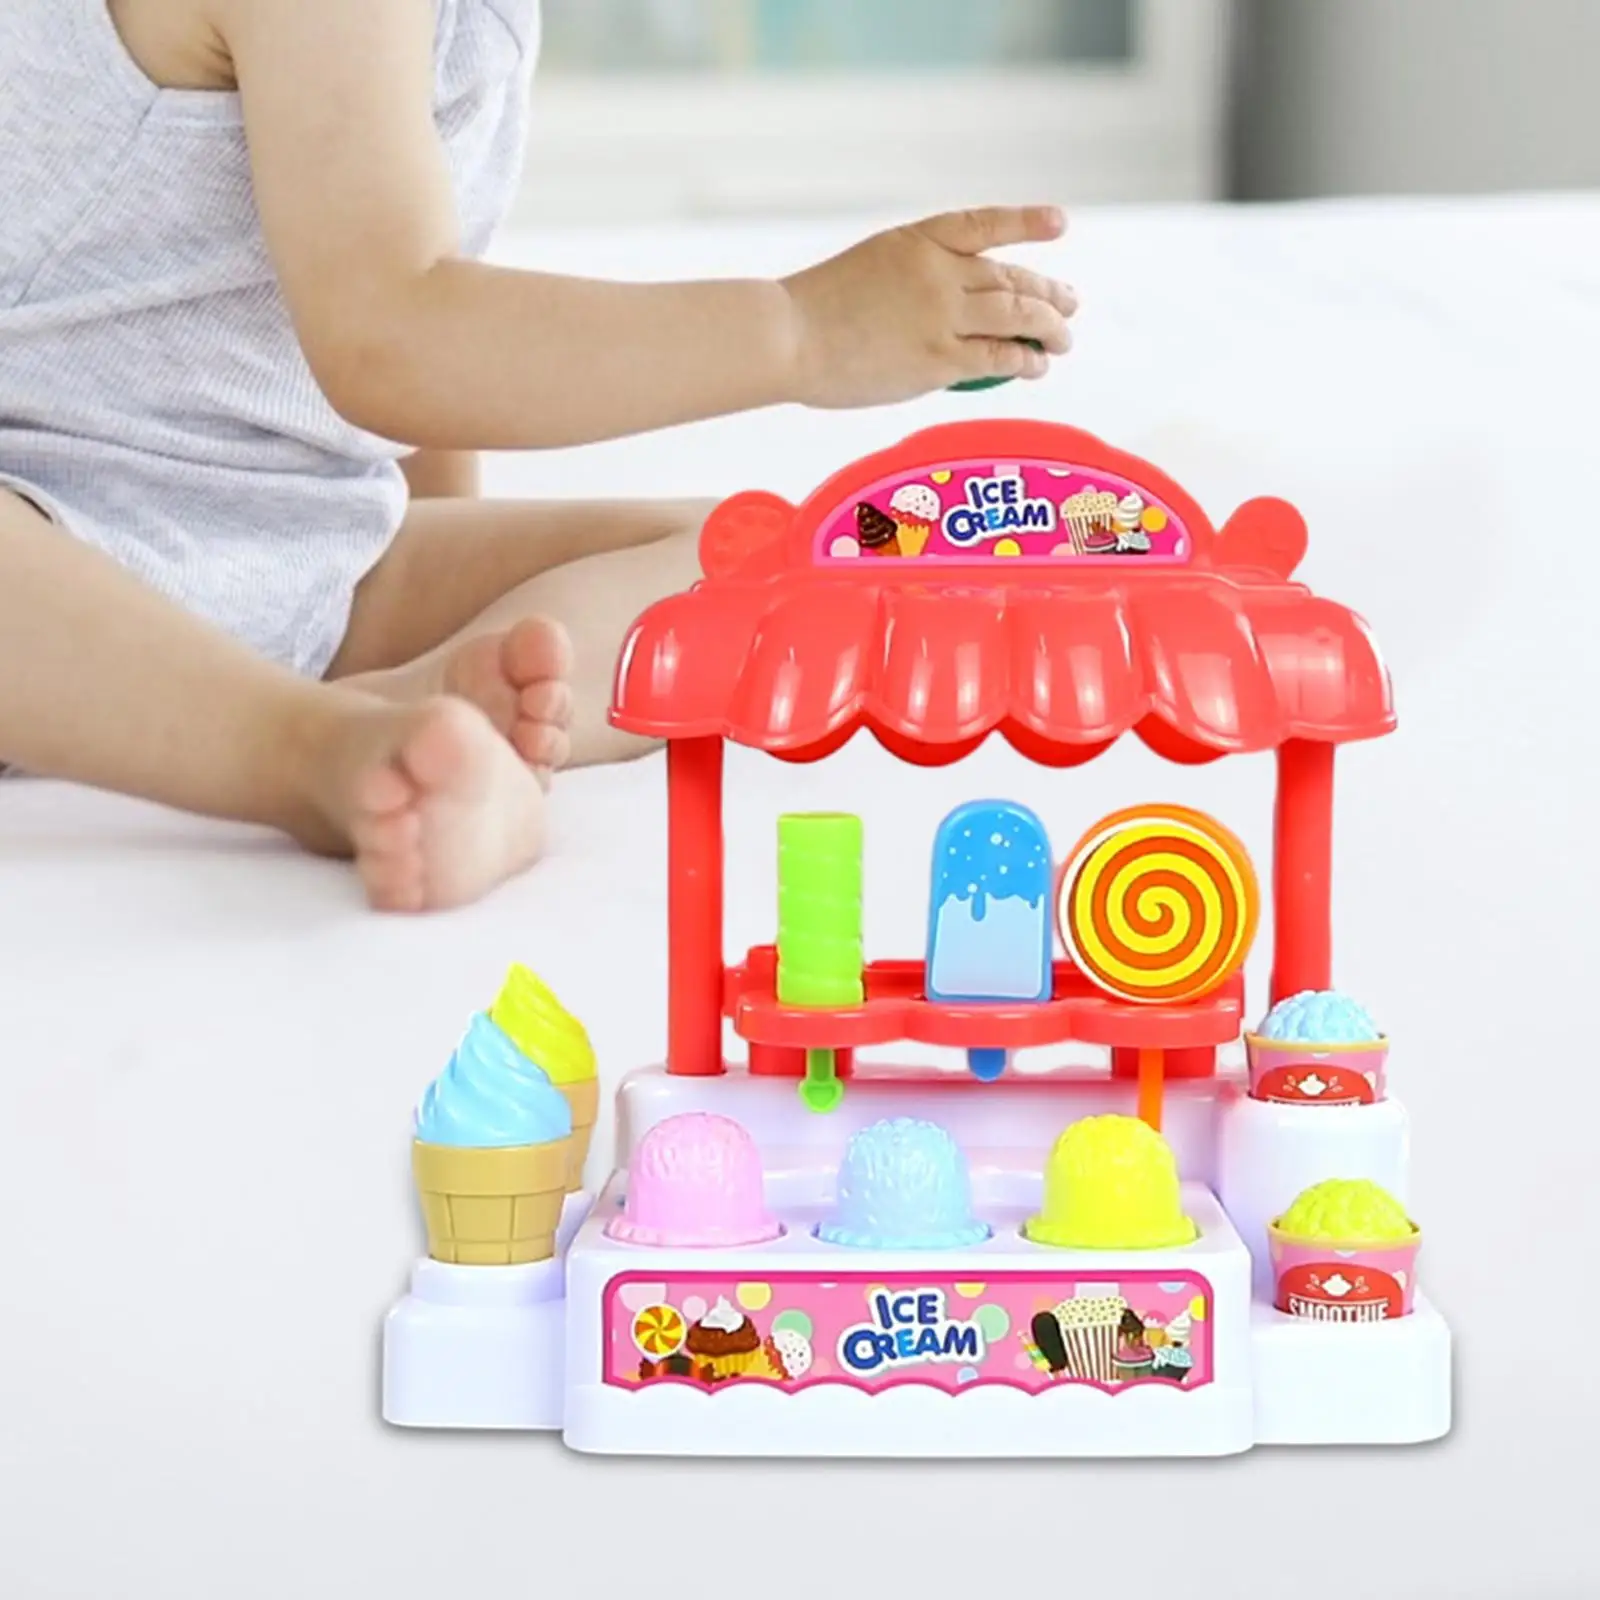 

Ice Cream Truck Role Play Game Playset Preschool Toys Multicolour Playset for Pretend Play Toy Educational Toys Wooden Toy